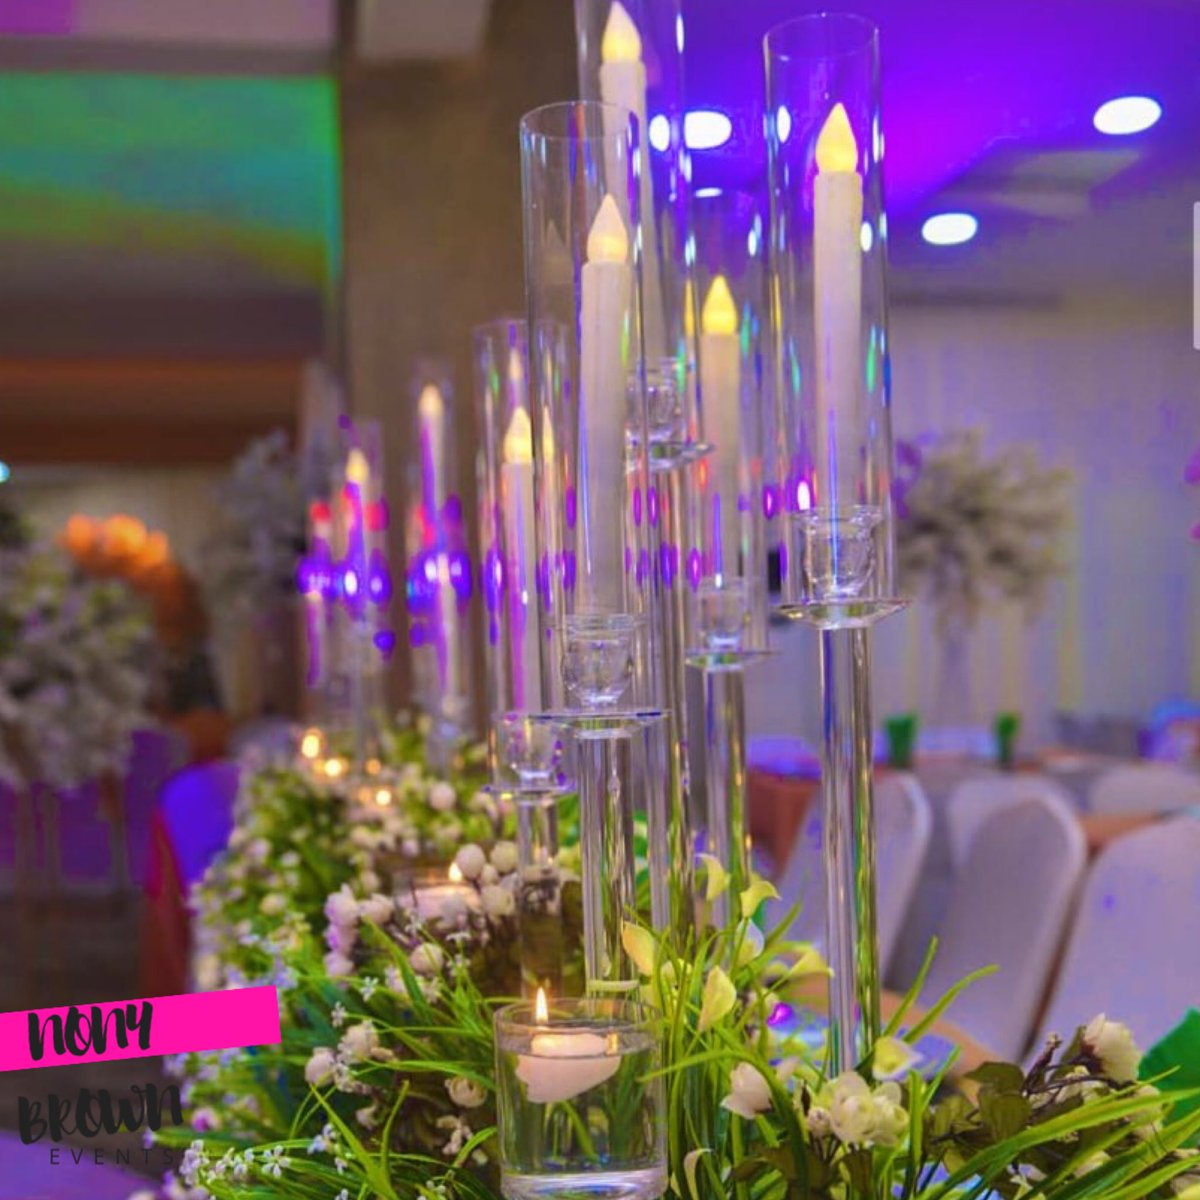 Still crushing on our unique candle stand design.
.
.
.
#weddings #eventplannerinlagos